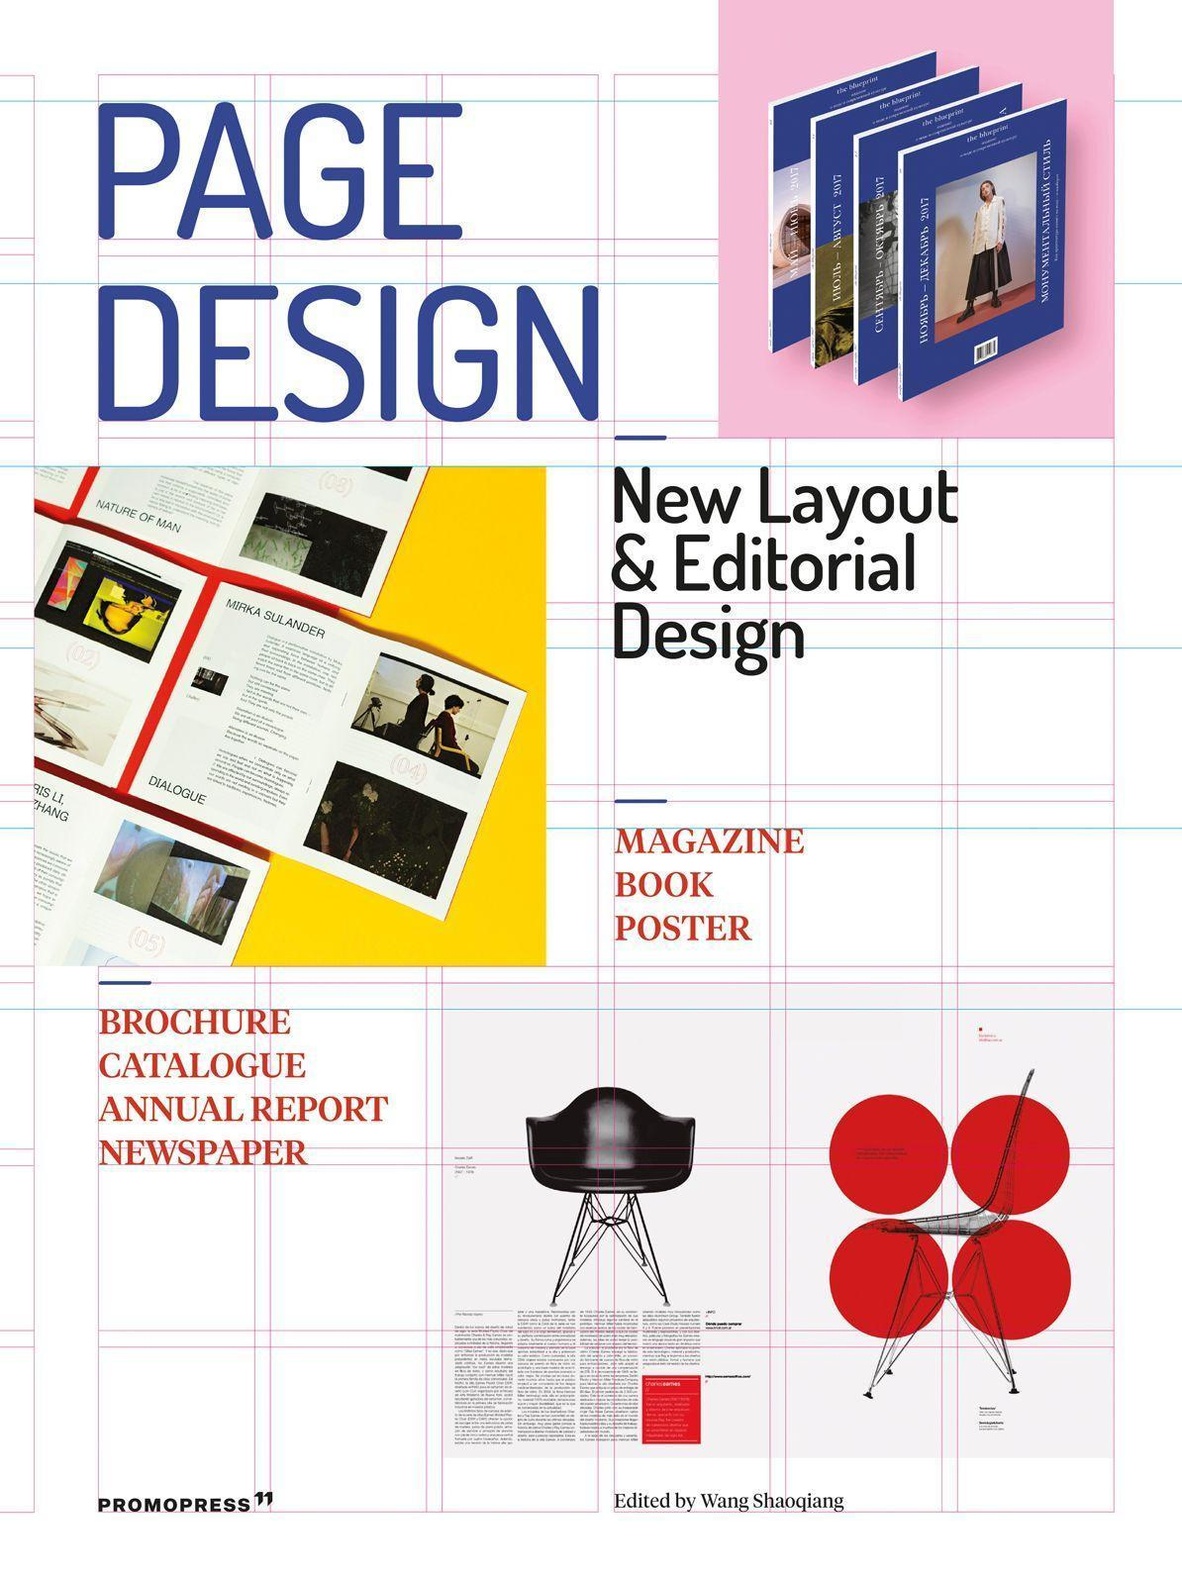 Cover of a book titled 'Page Design' showing a grid in the background